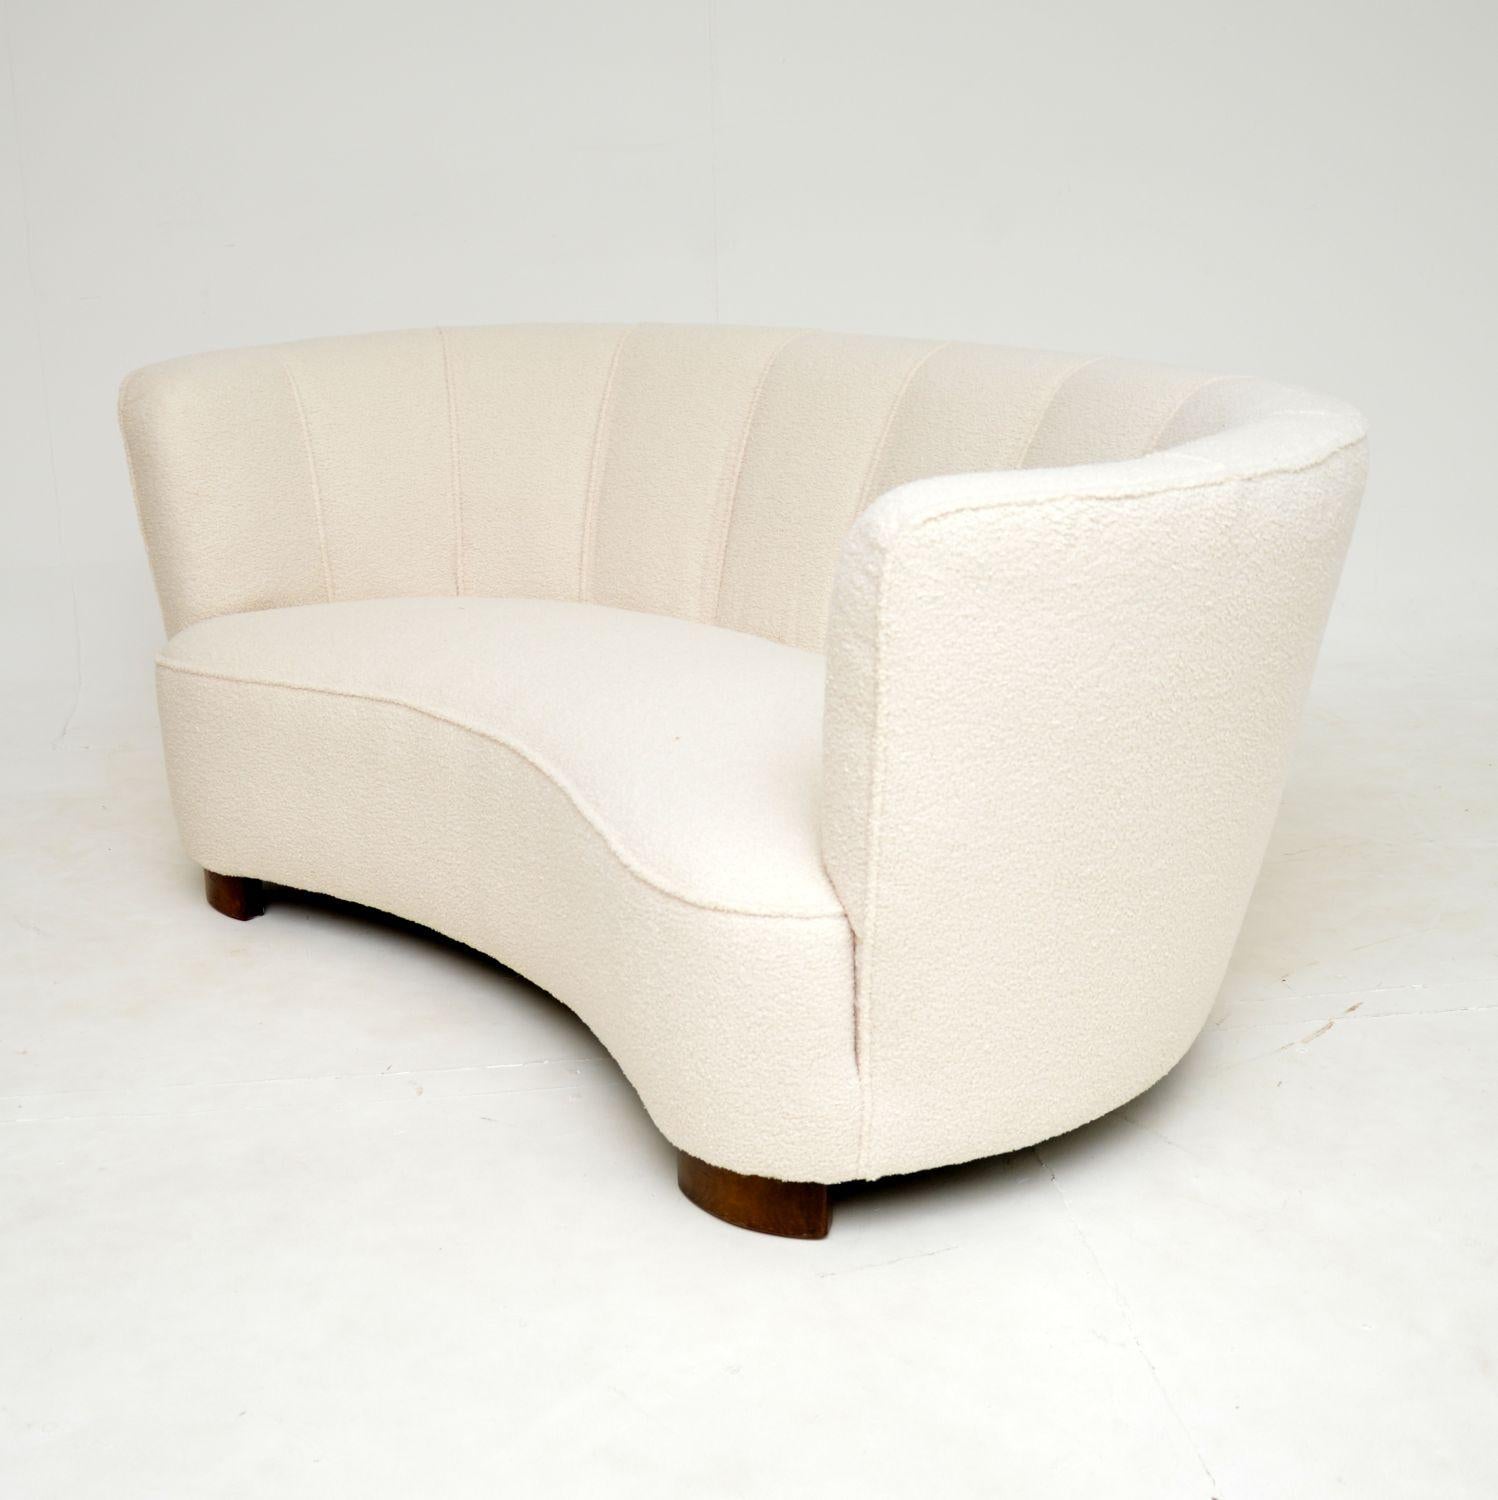 A fantastic vintage Danish curved banana cocktail sofa dating from the 1940’s. This was recently imported from Denmark.

This is of superb quality, it is very well built and very comfortable. It is a great size, comfortably seating two and it can